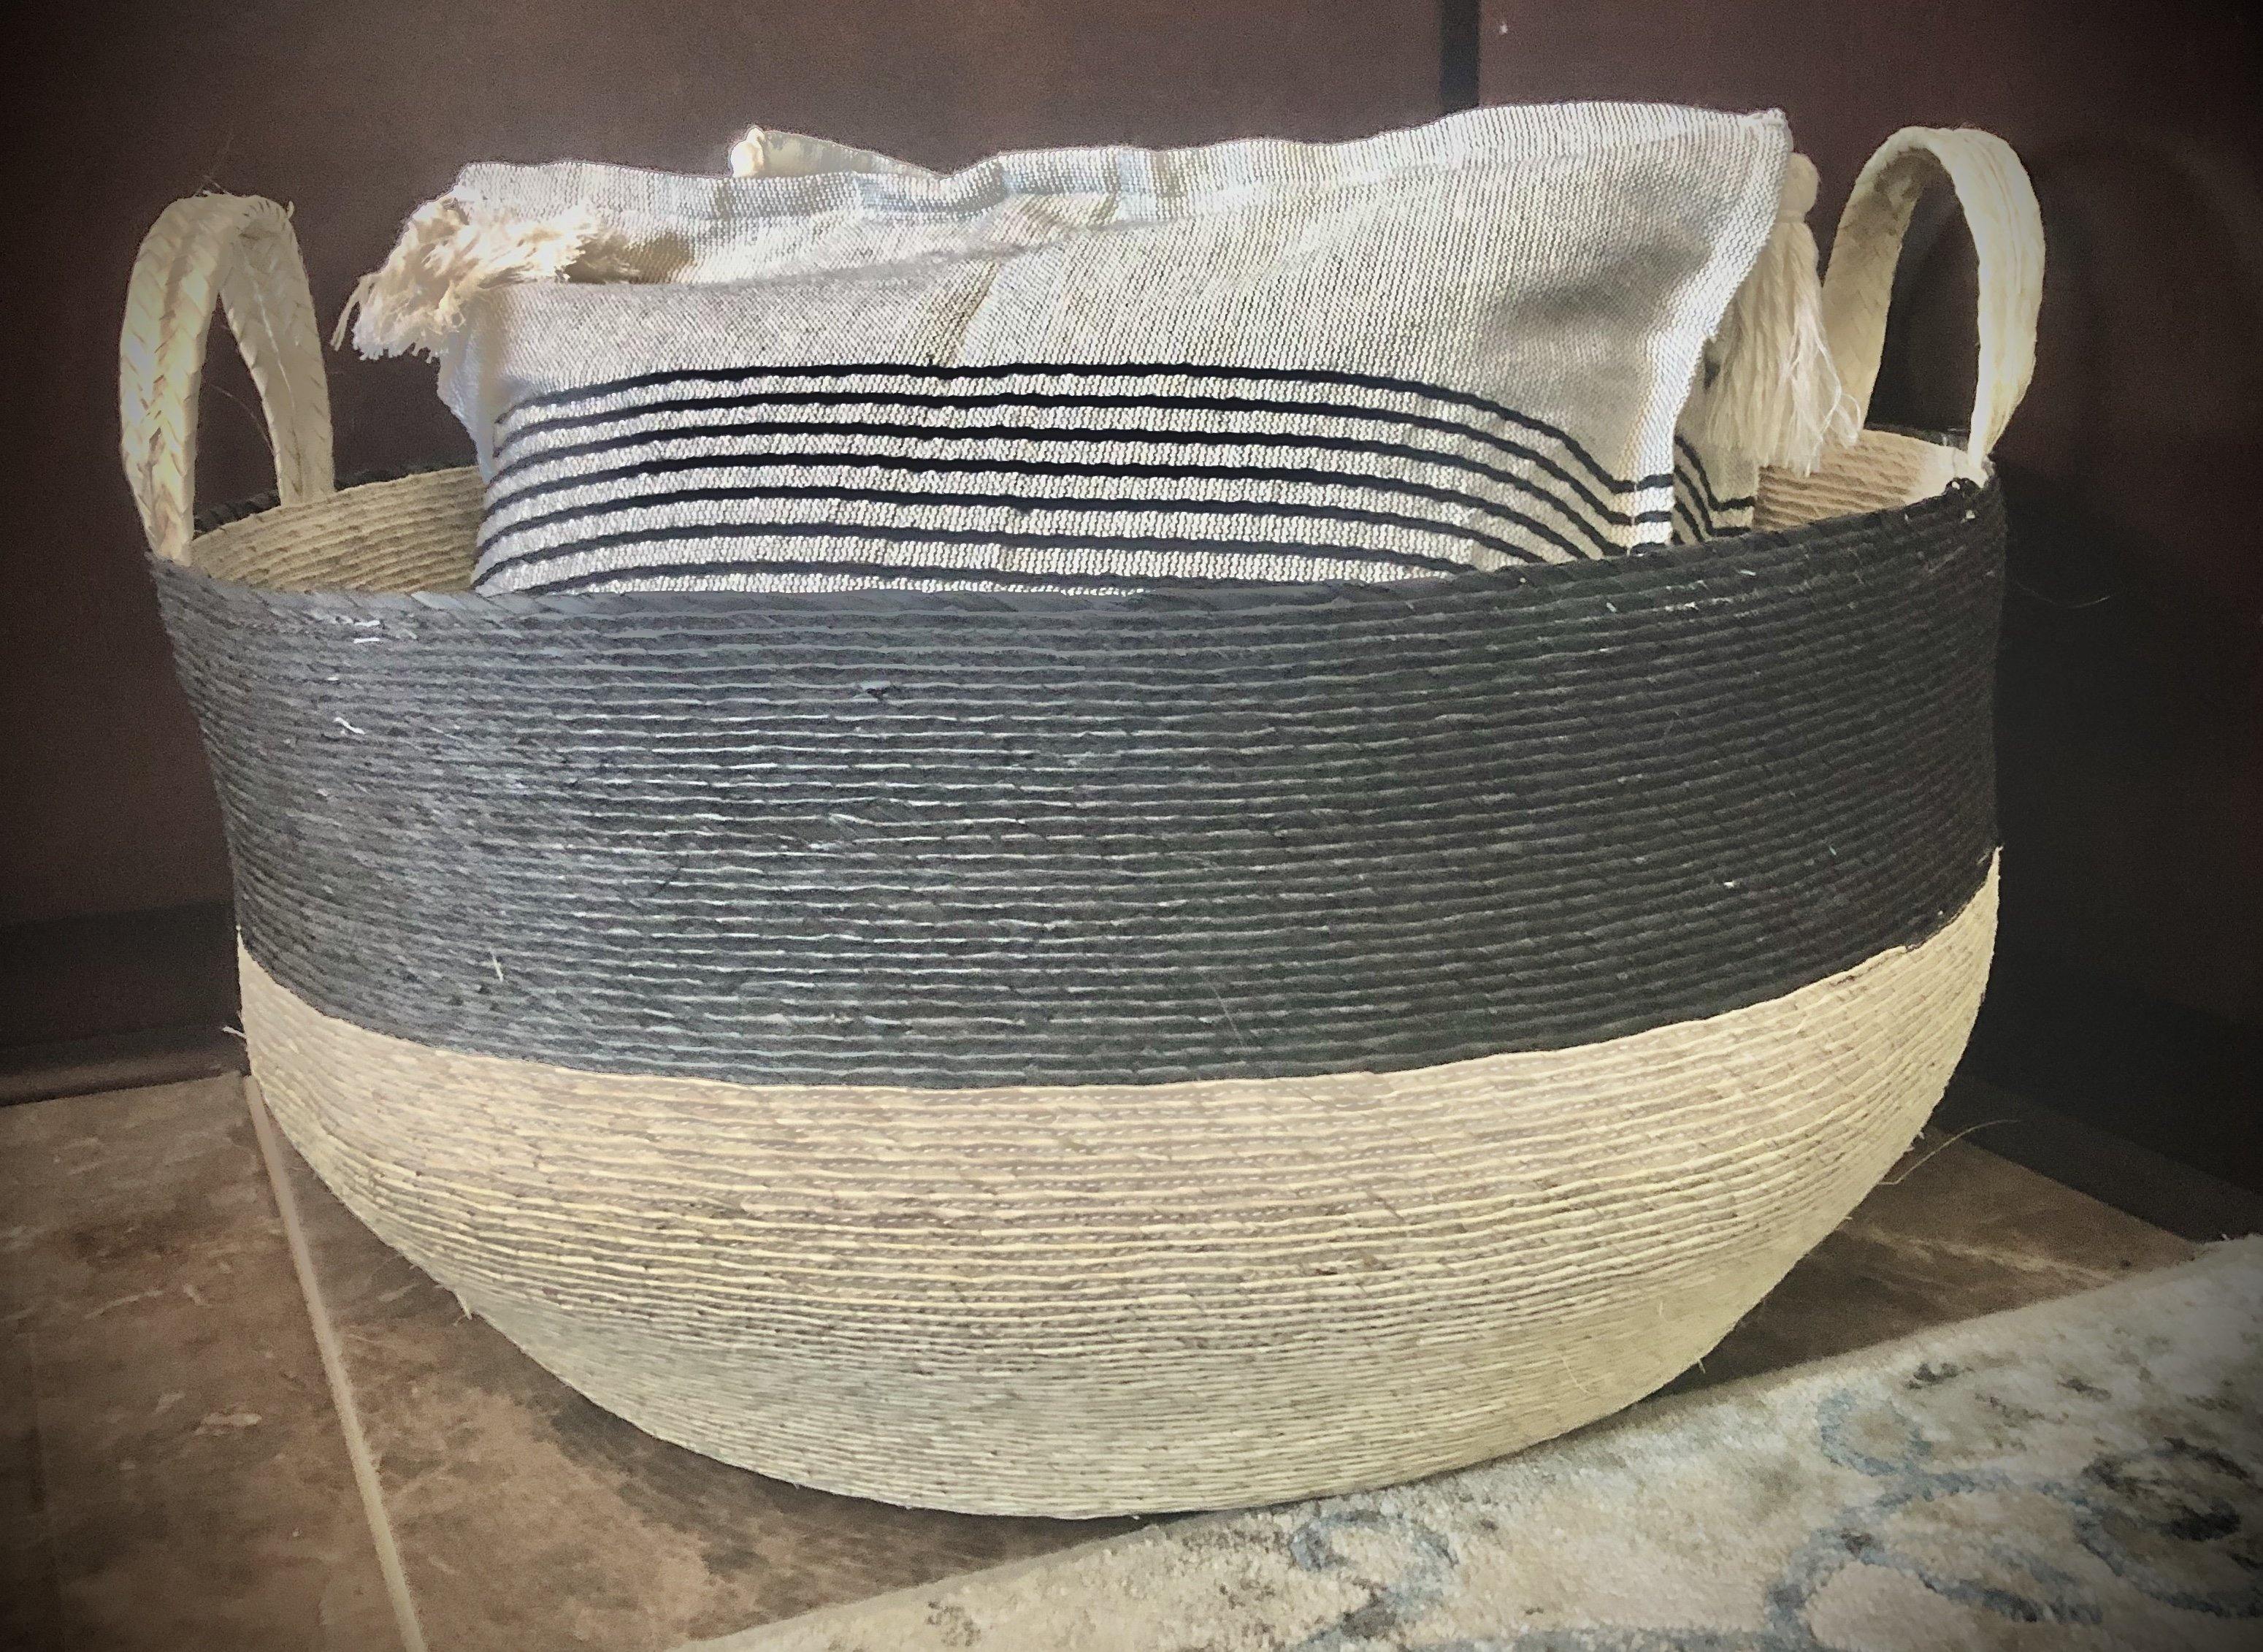 Set of 3 Handmade, Natural with Black Sewn Palm Tote Baskets - HomageMade 